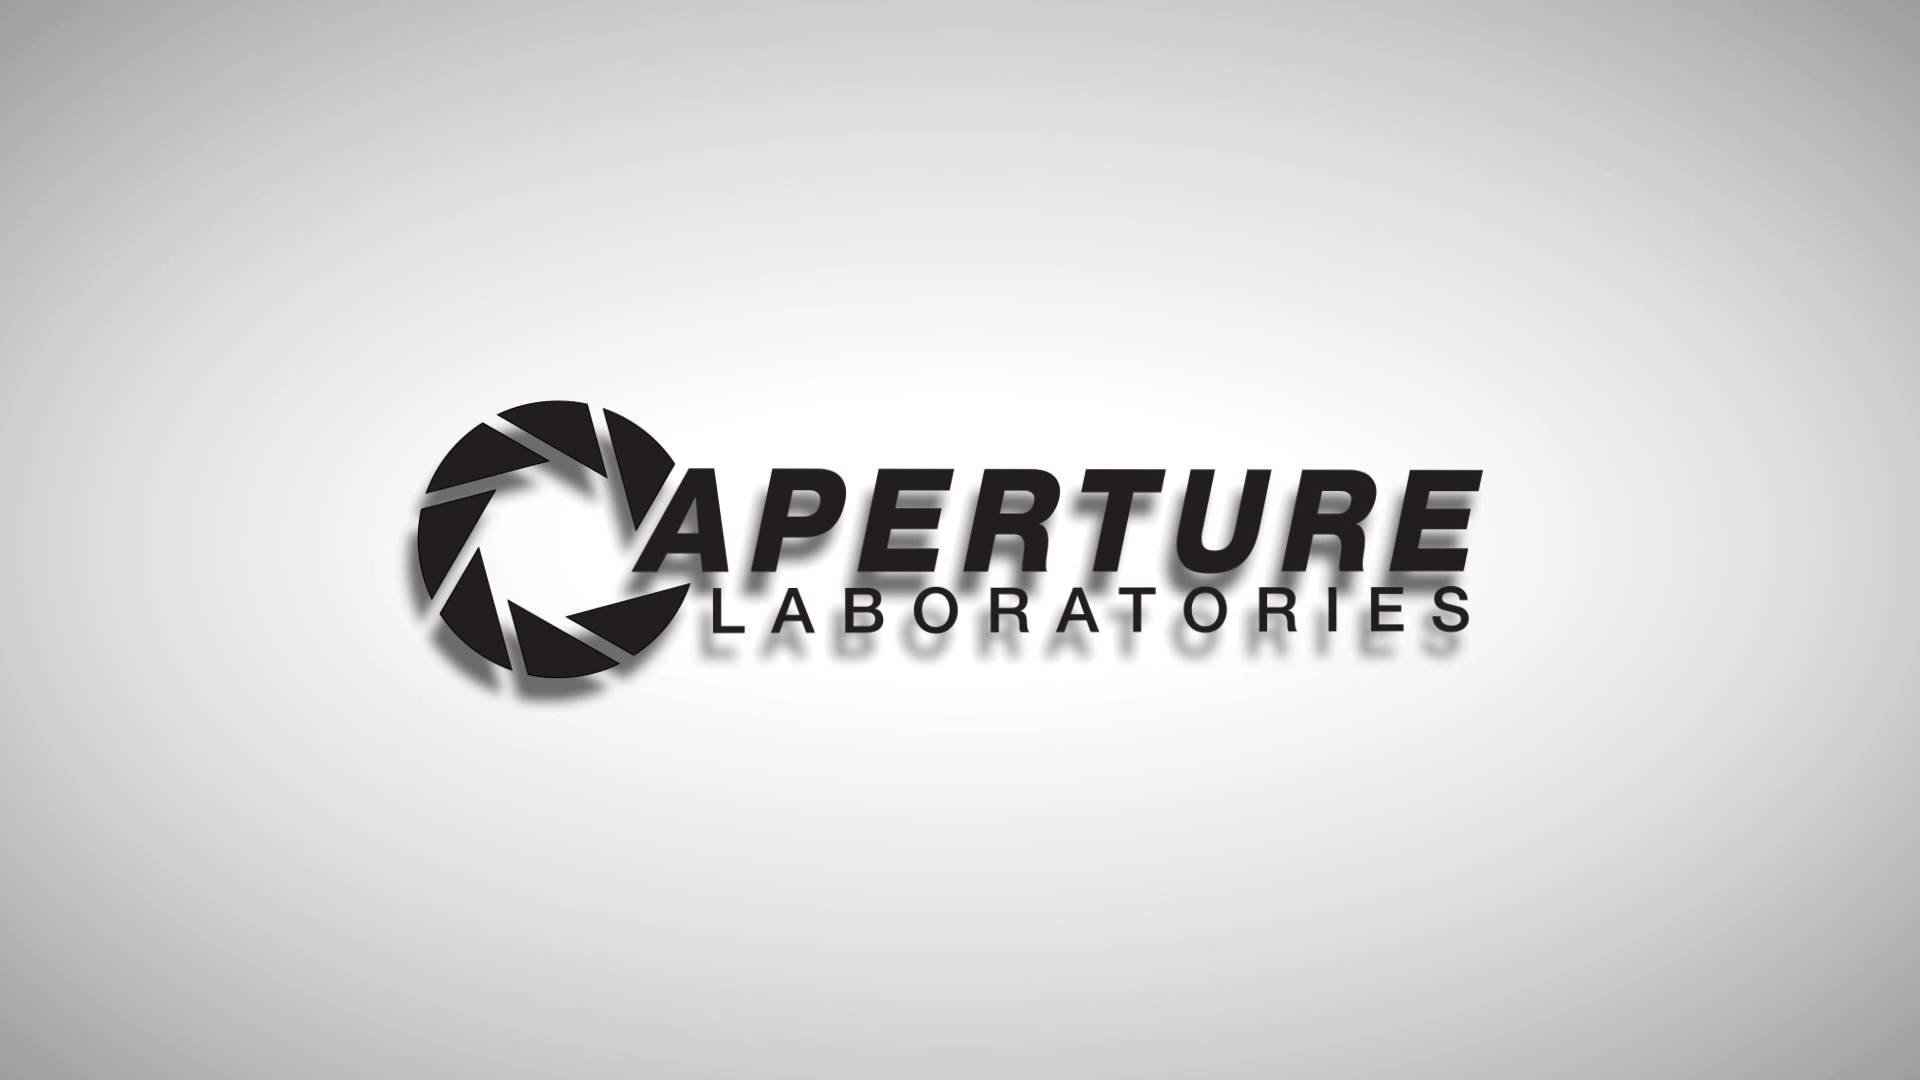 Wallpapers For > Aperture Science Wallpapers 1366x768